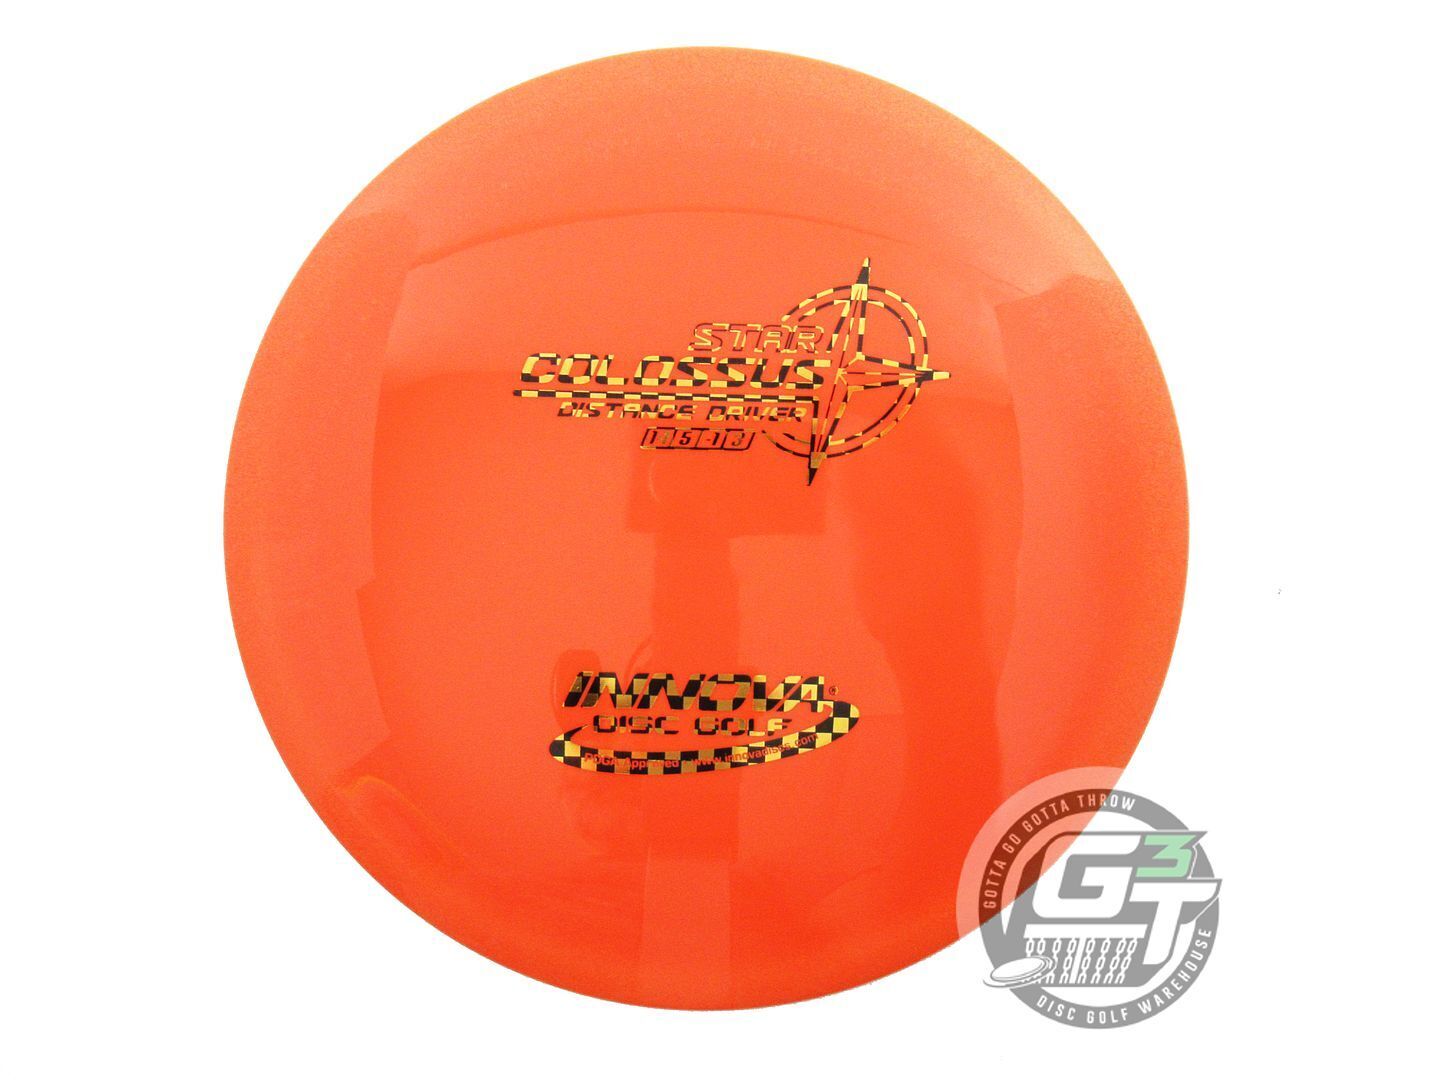 Innova Star Colossus Distance Driver Golf Disc (Individually Listed)